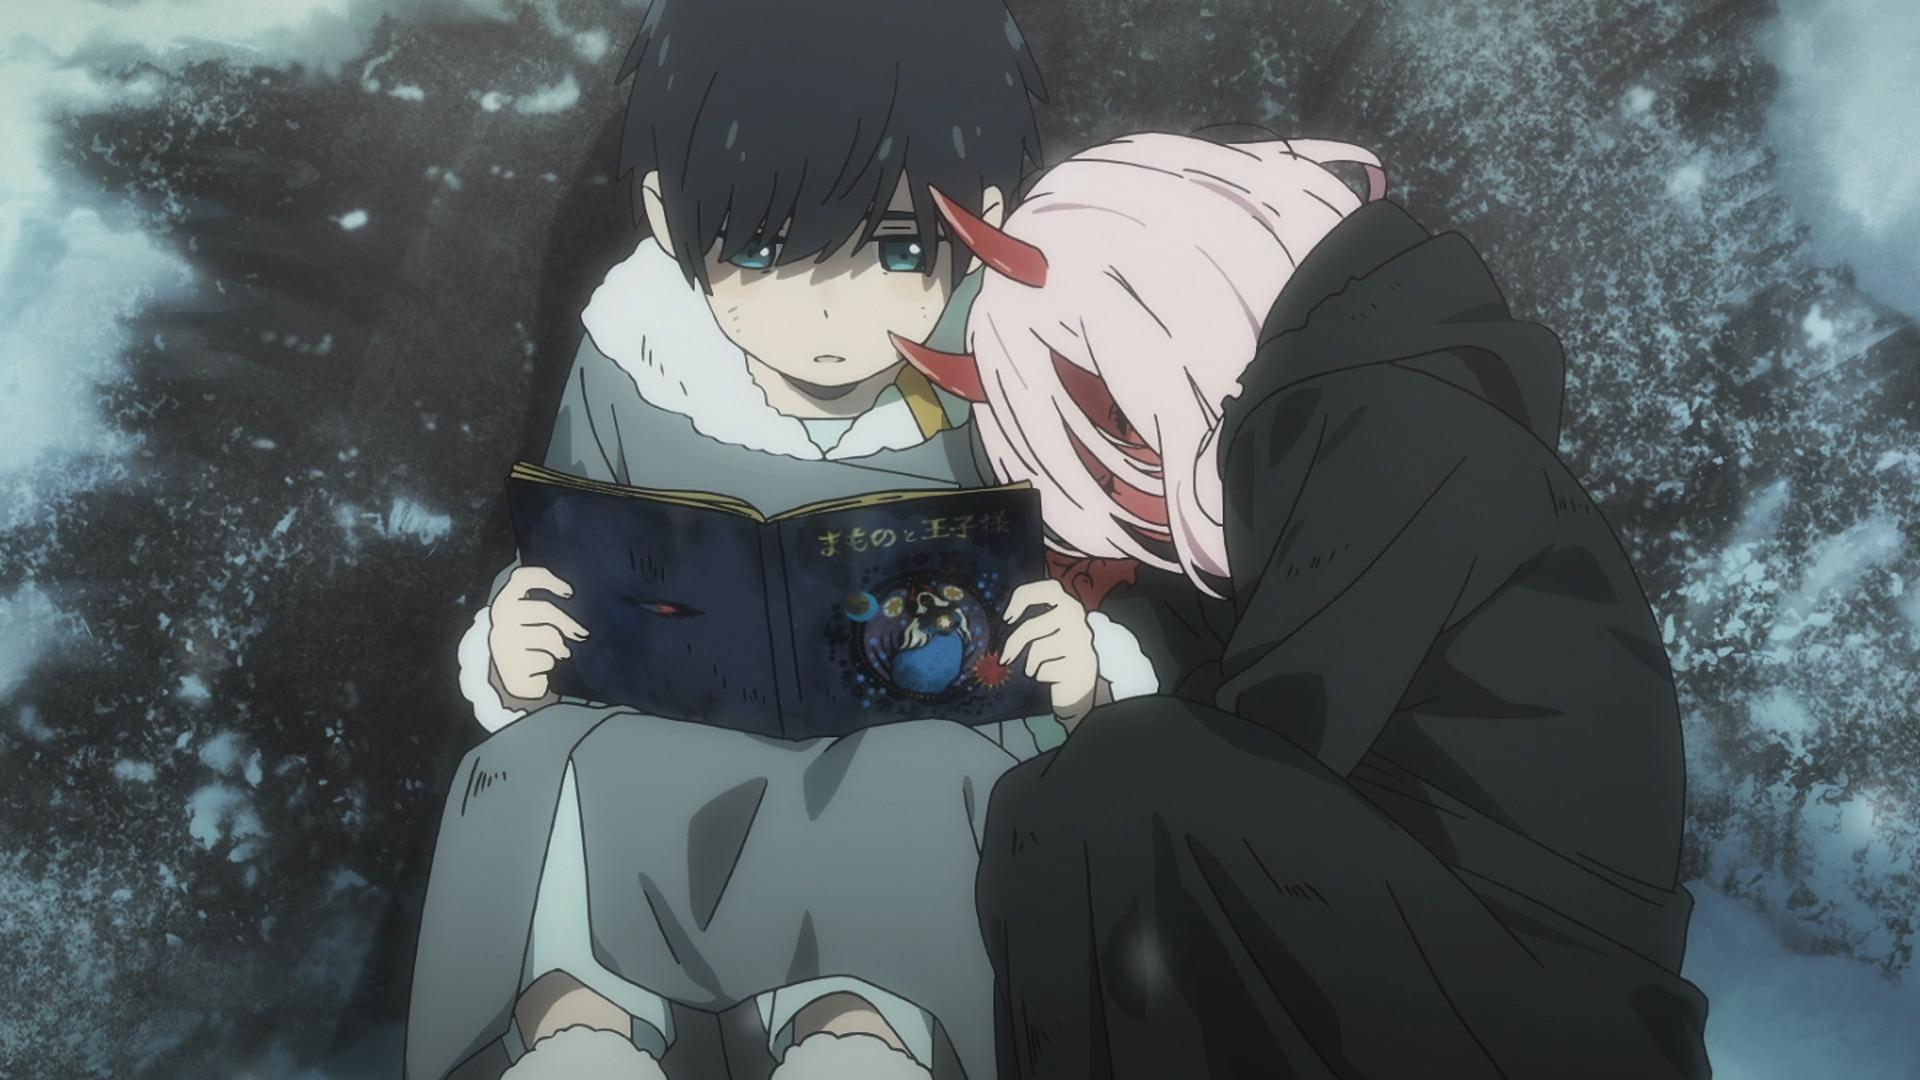 DARLING in the FRANXX Ep. 13: Fairy tale romance